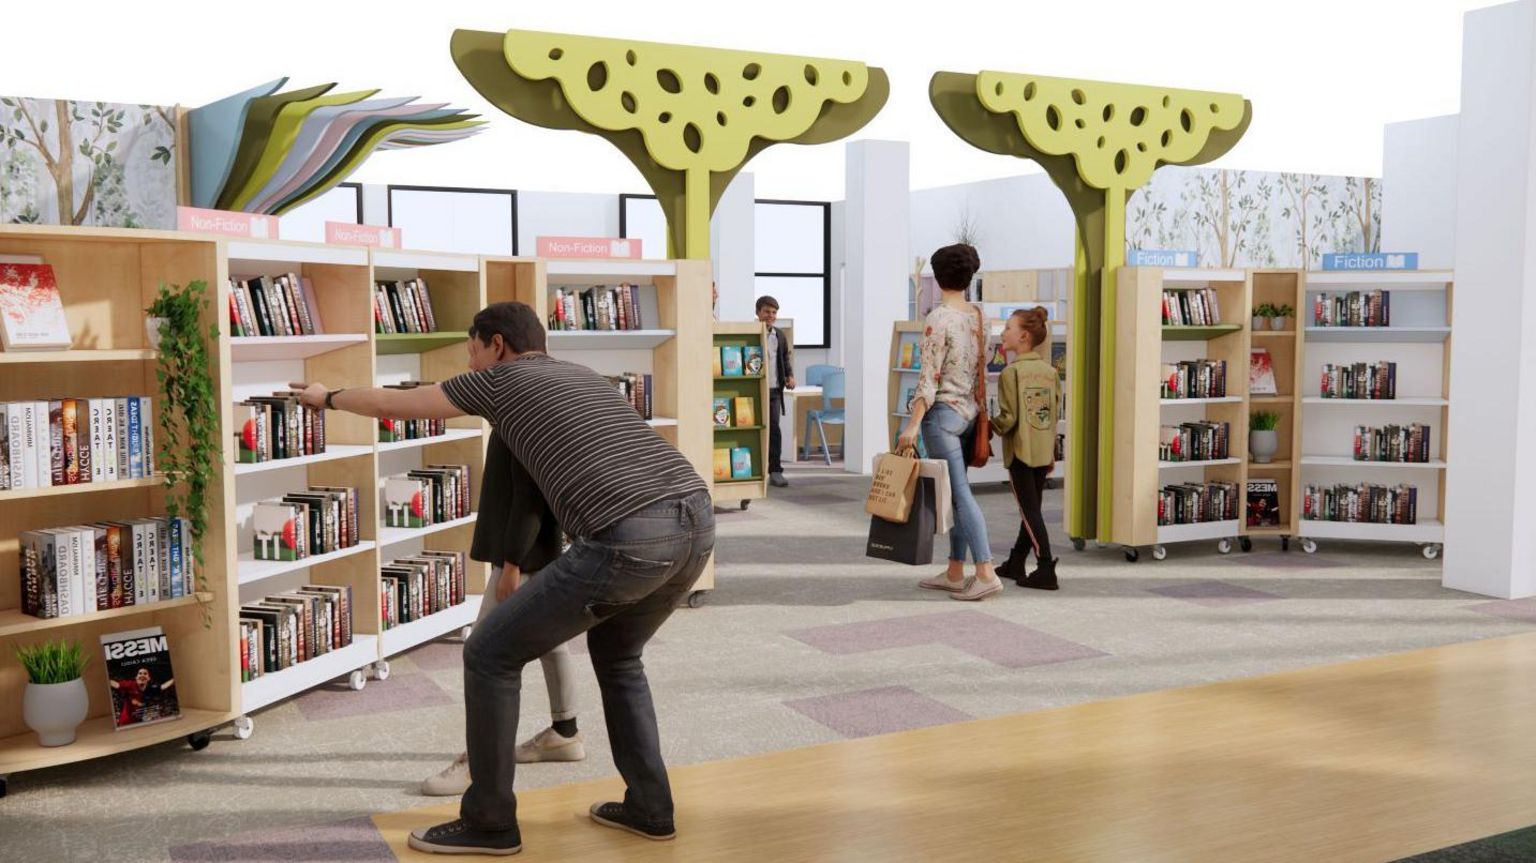 Image of how children's library entrance may look 